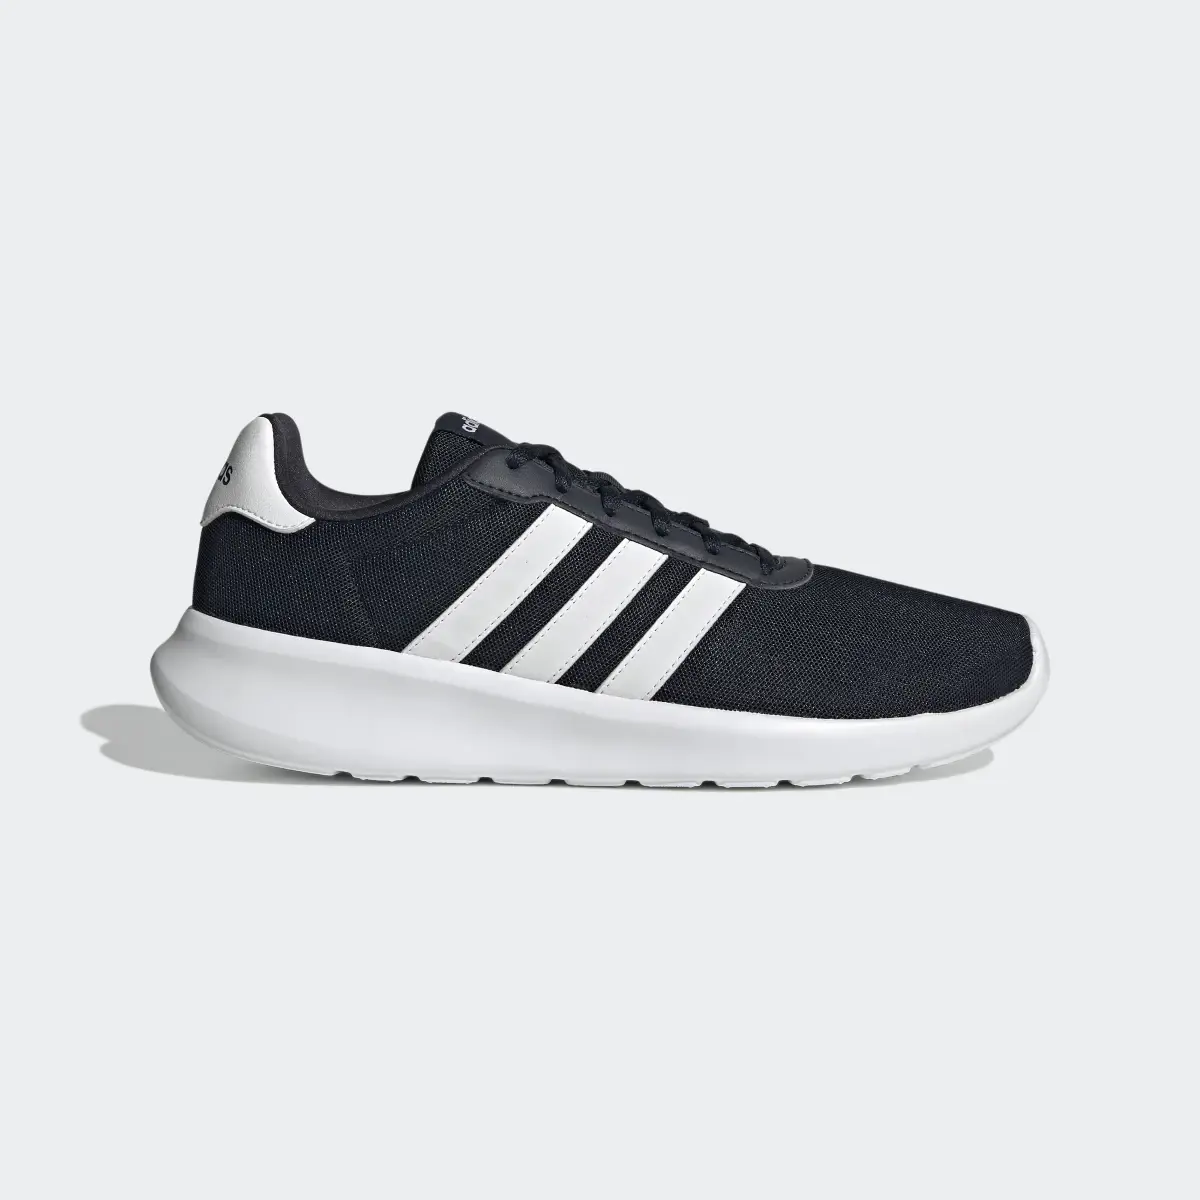 Adidas Lite Racer 3.0 Shoes. 2